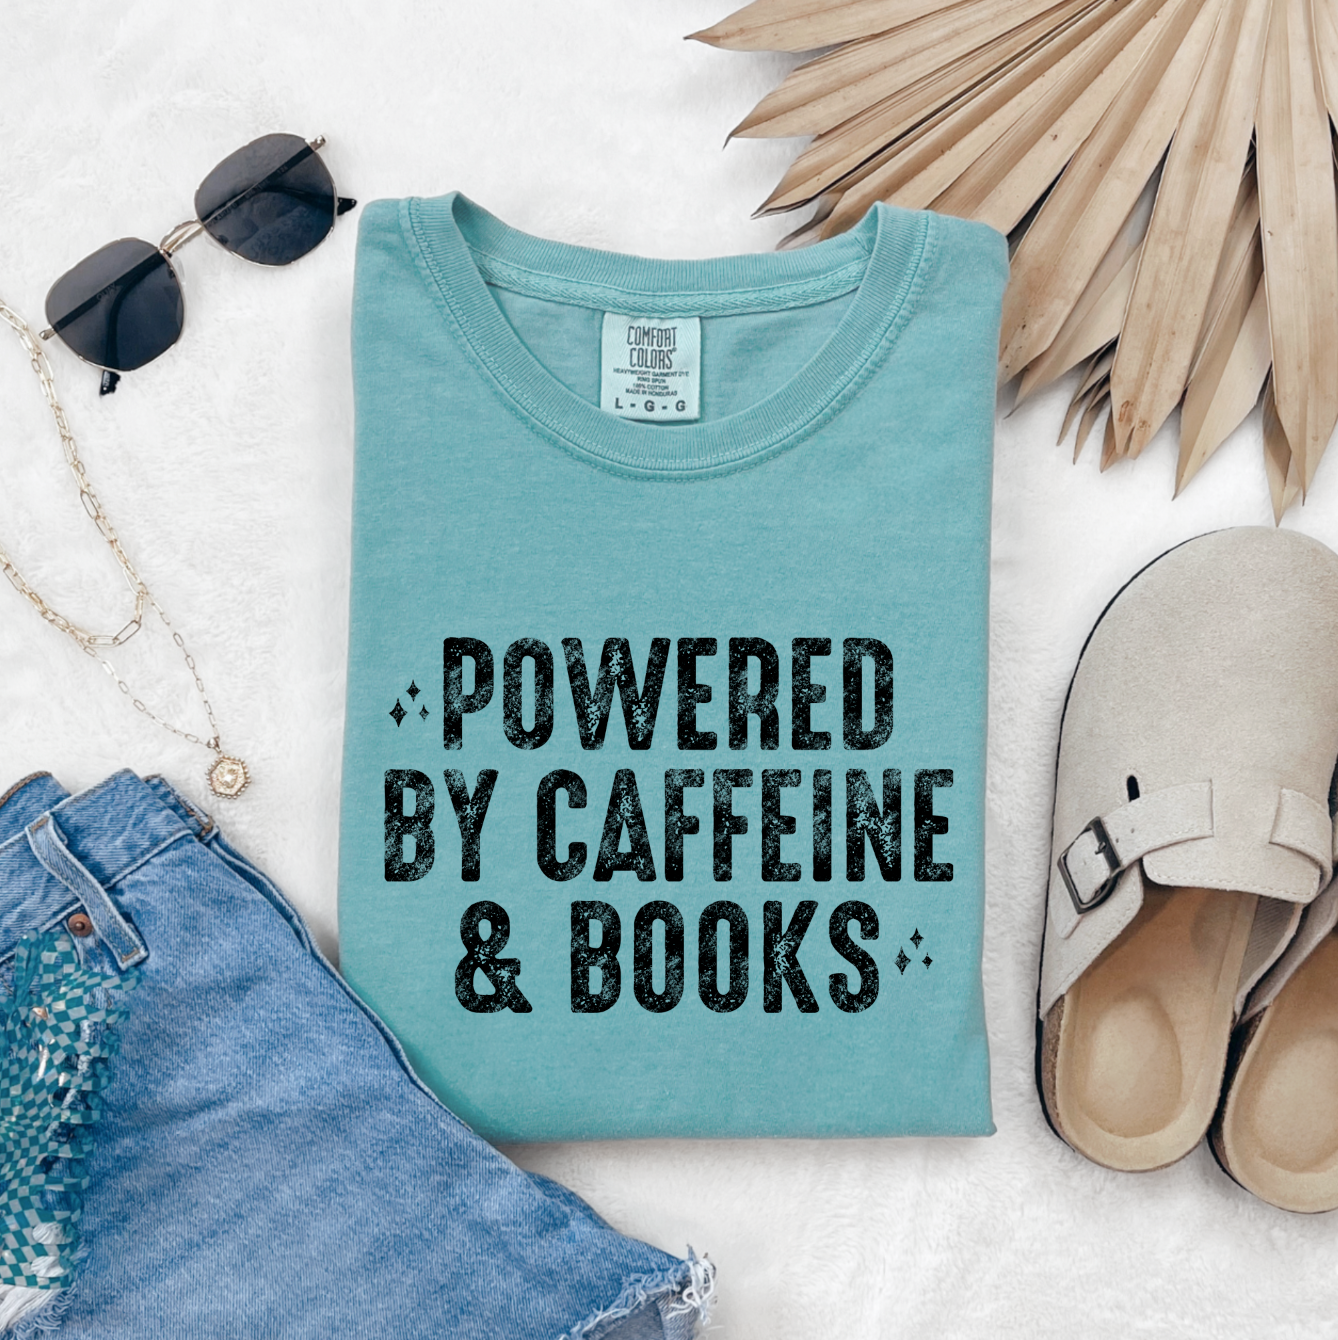 Powered by caffeine and books